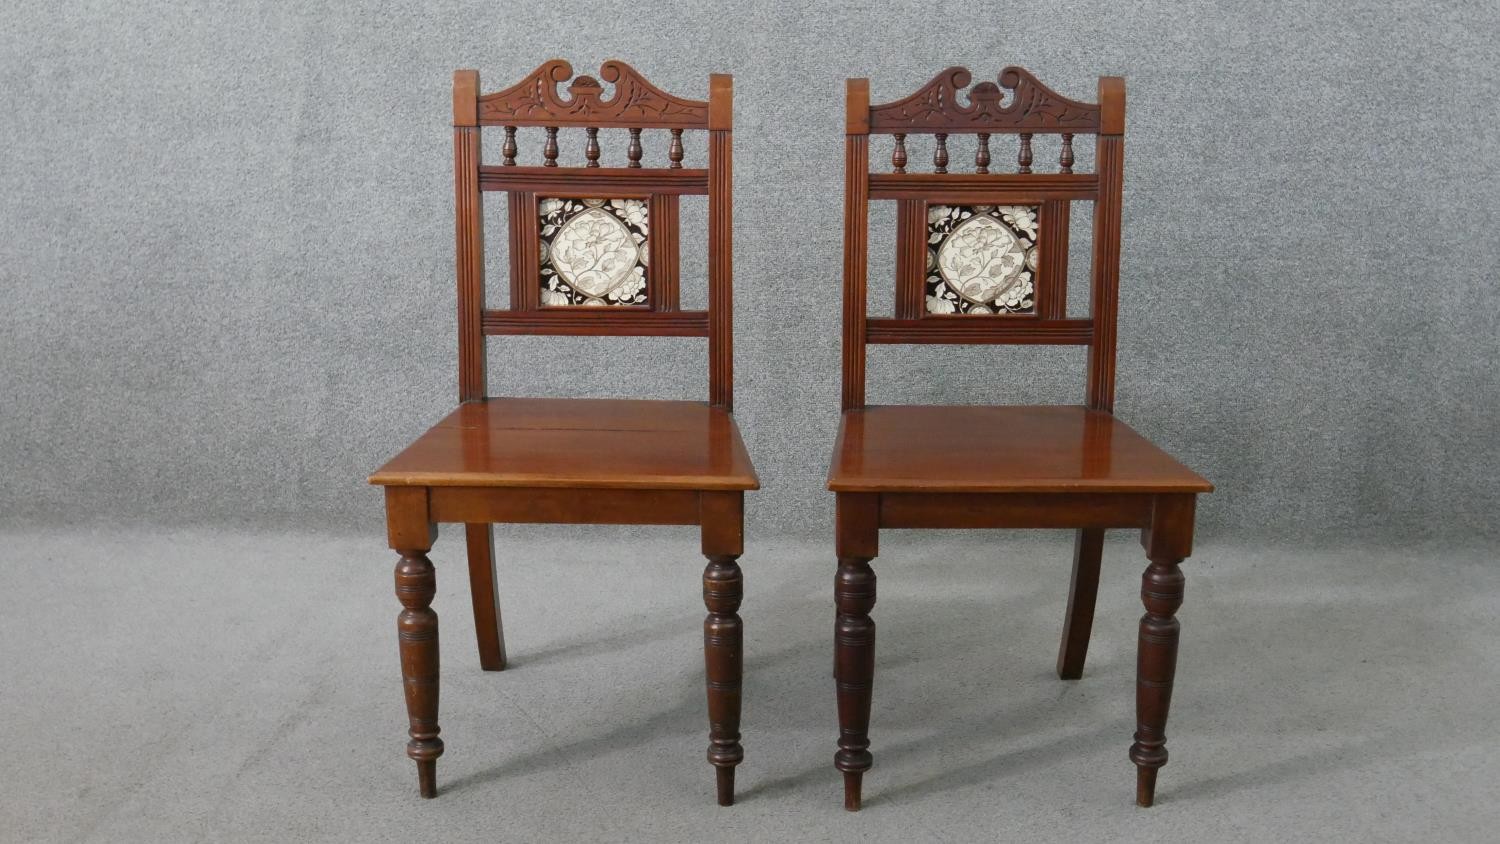 A pair of Victorian walnut Aesthetic movement hall chairs, the back set with a single tile, possibly